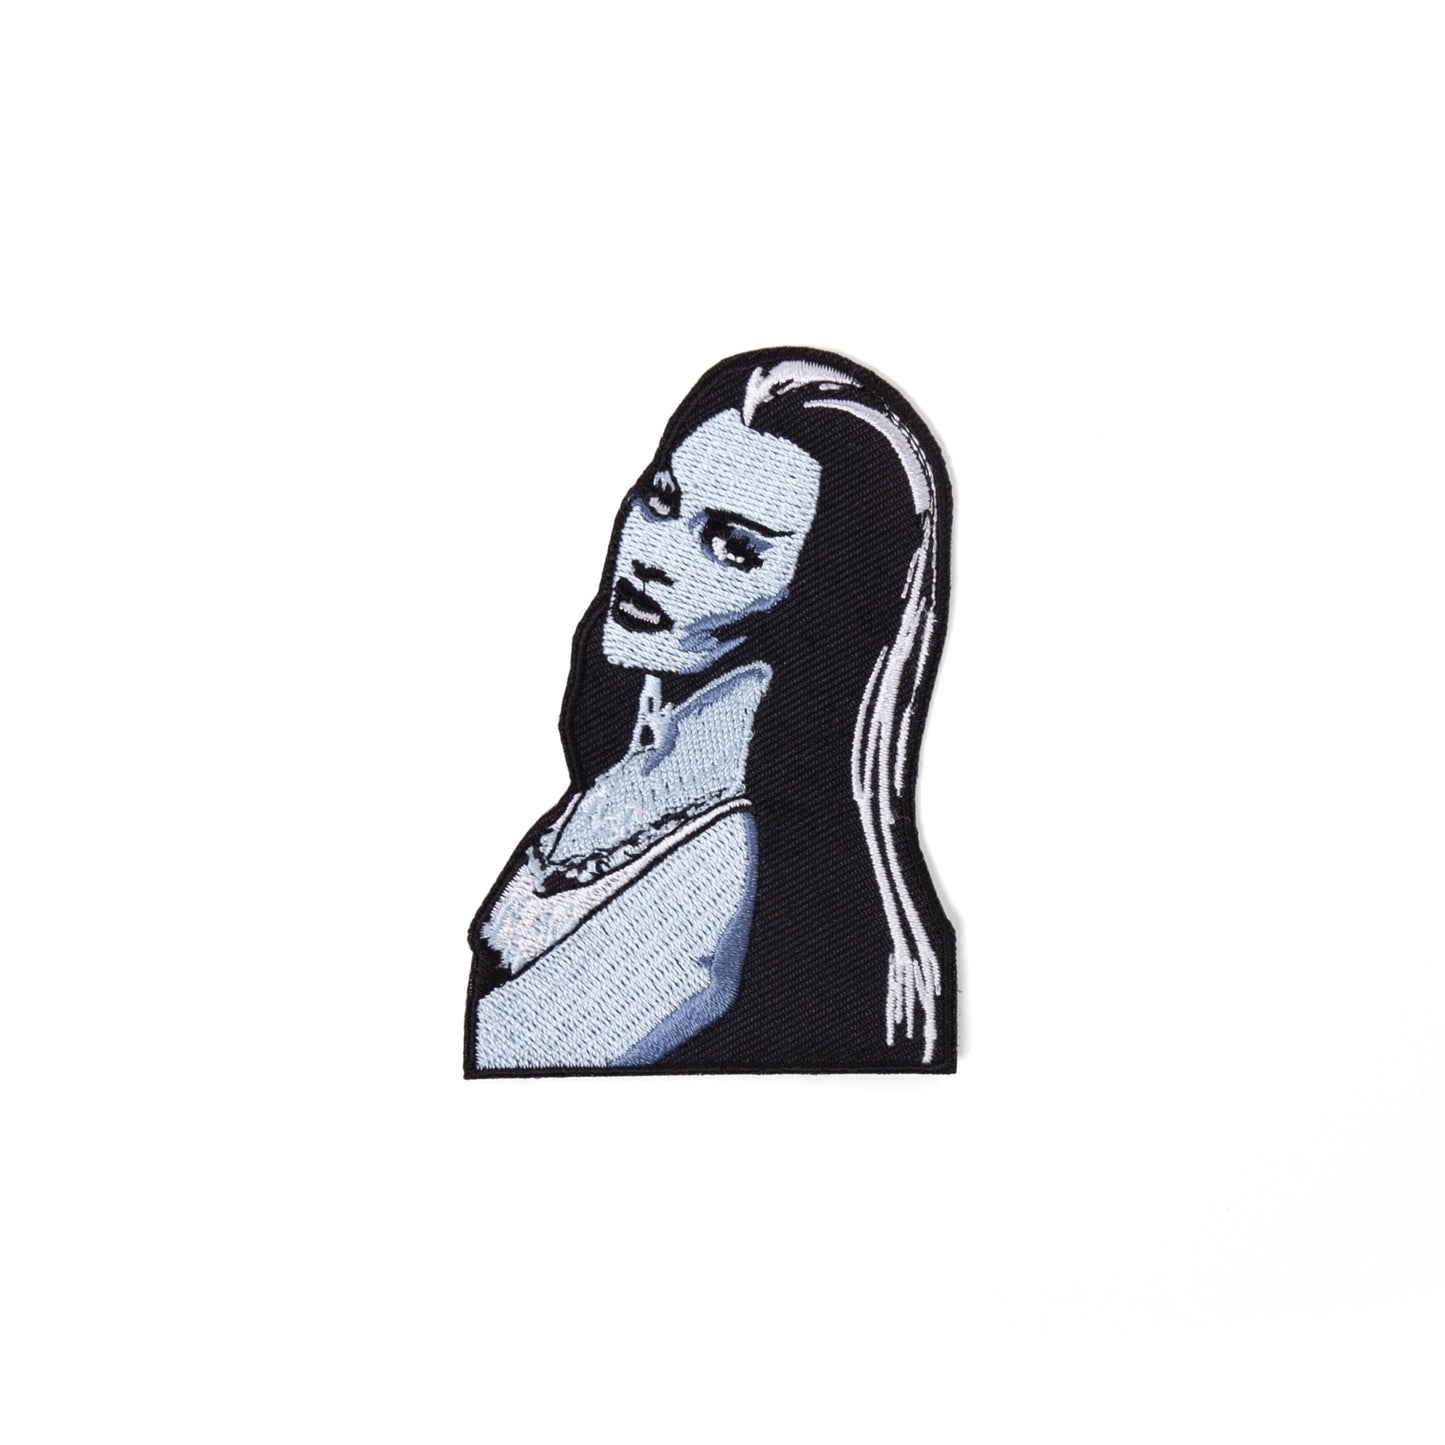 Lily Munster Embroidered Patch